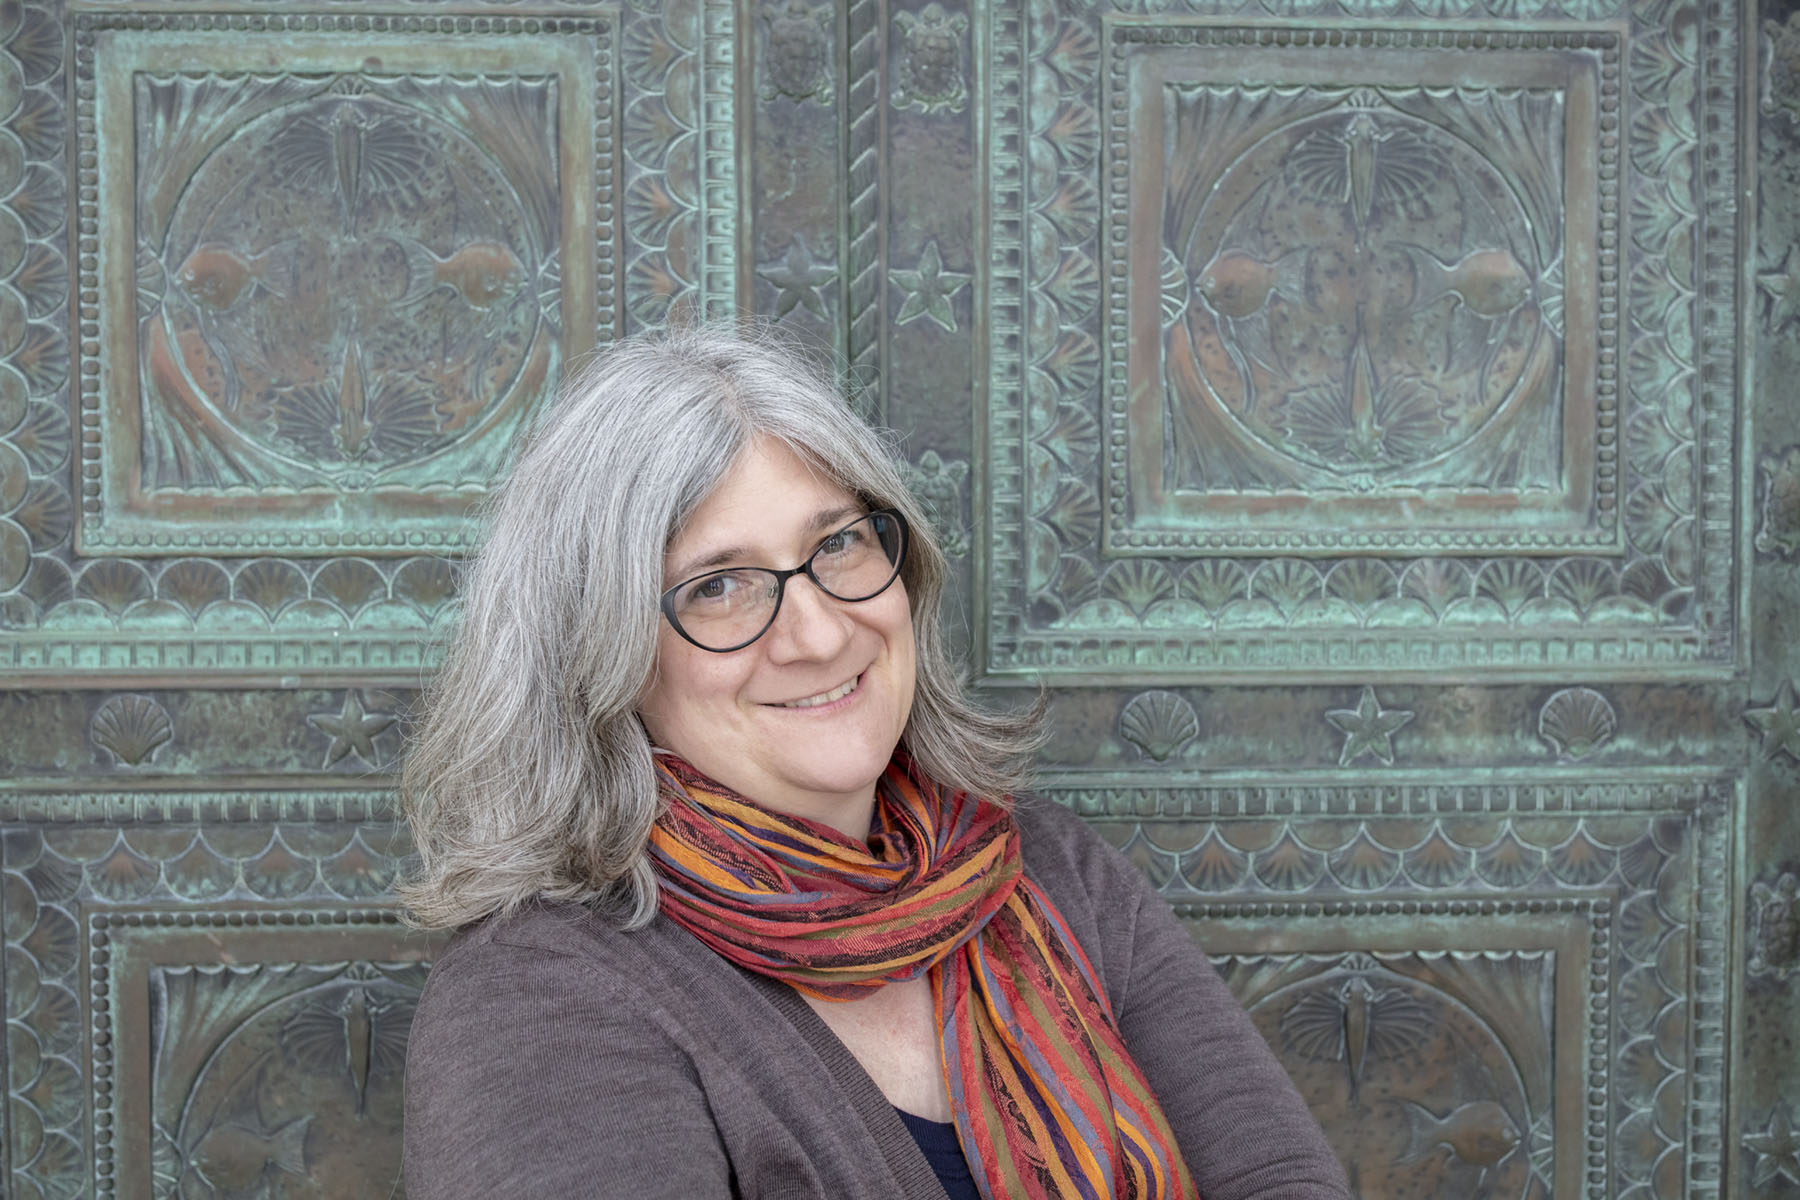 Kris is a white woman with shoulder length gray hair, smiling as she stands in front of a patterned door.